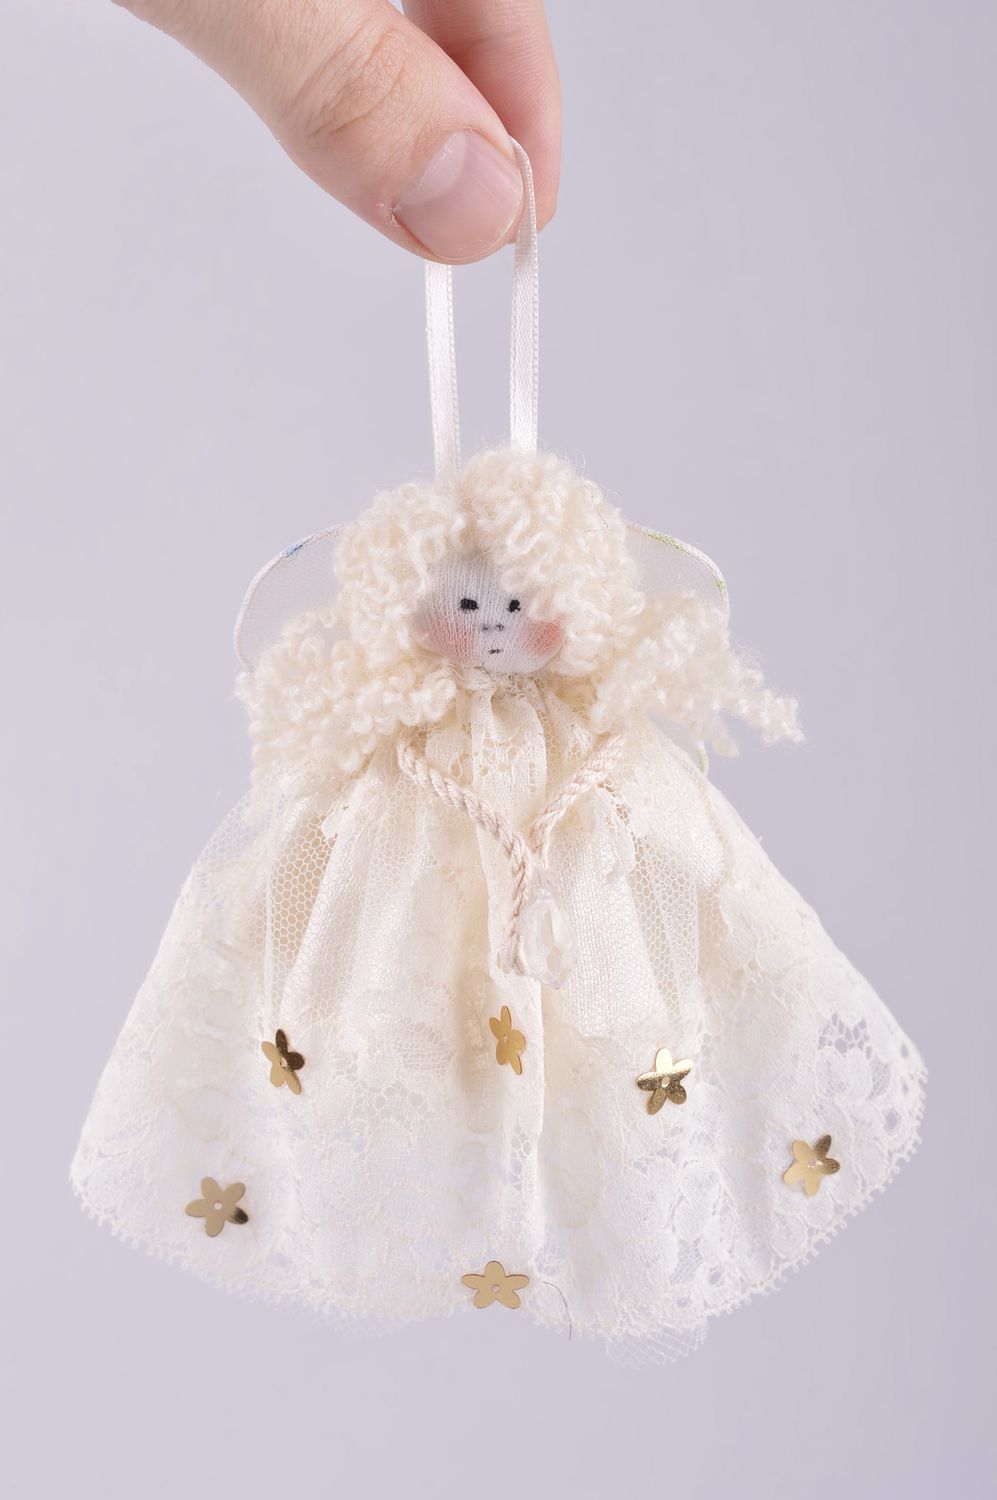 Handmade interior doll wall hanging home decor decorative use only gift for baby photo 5